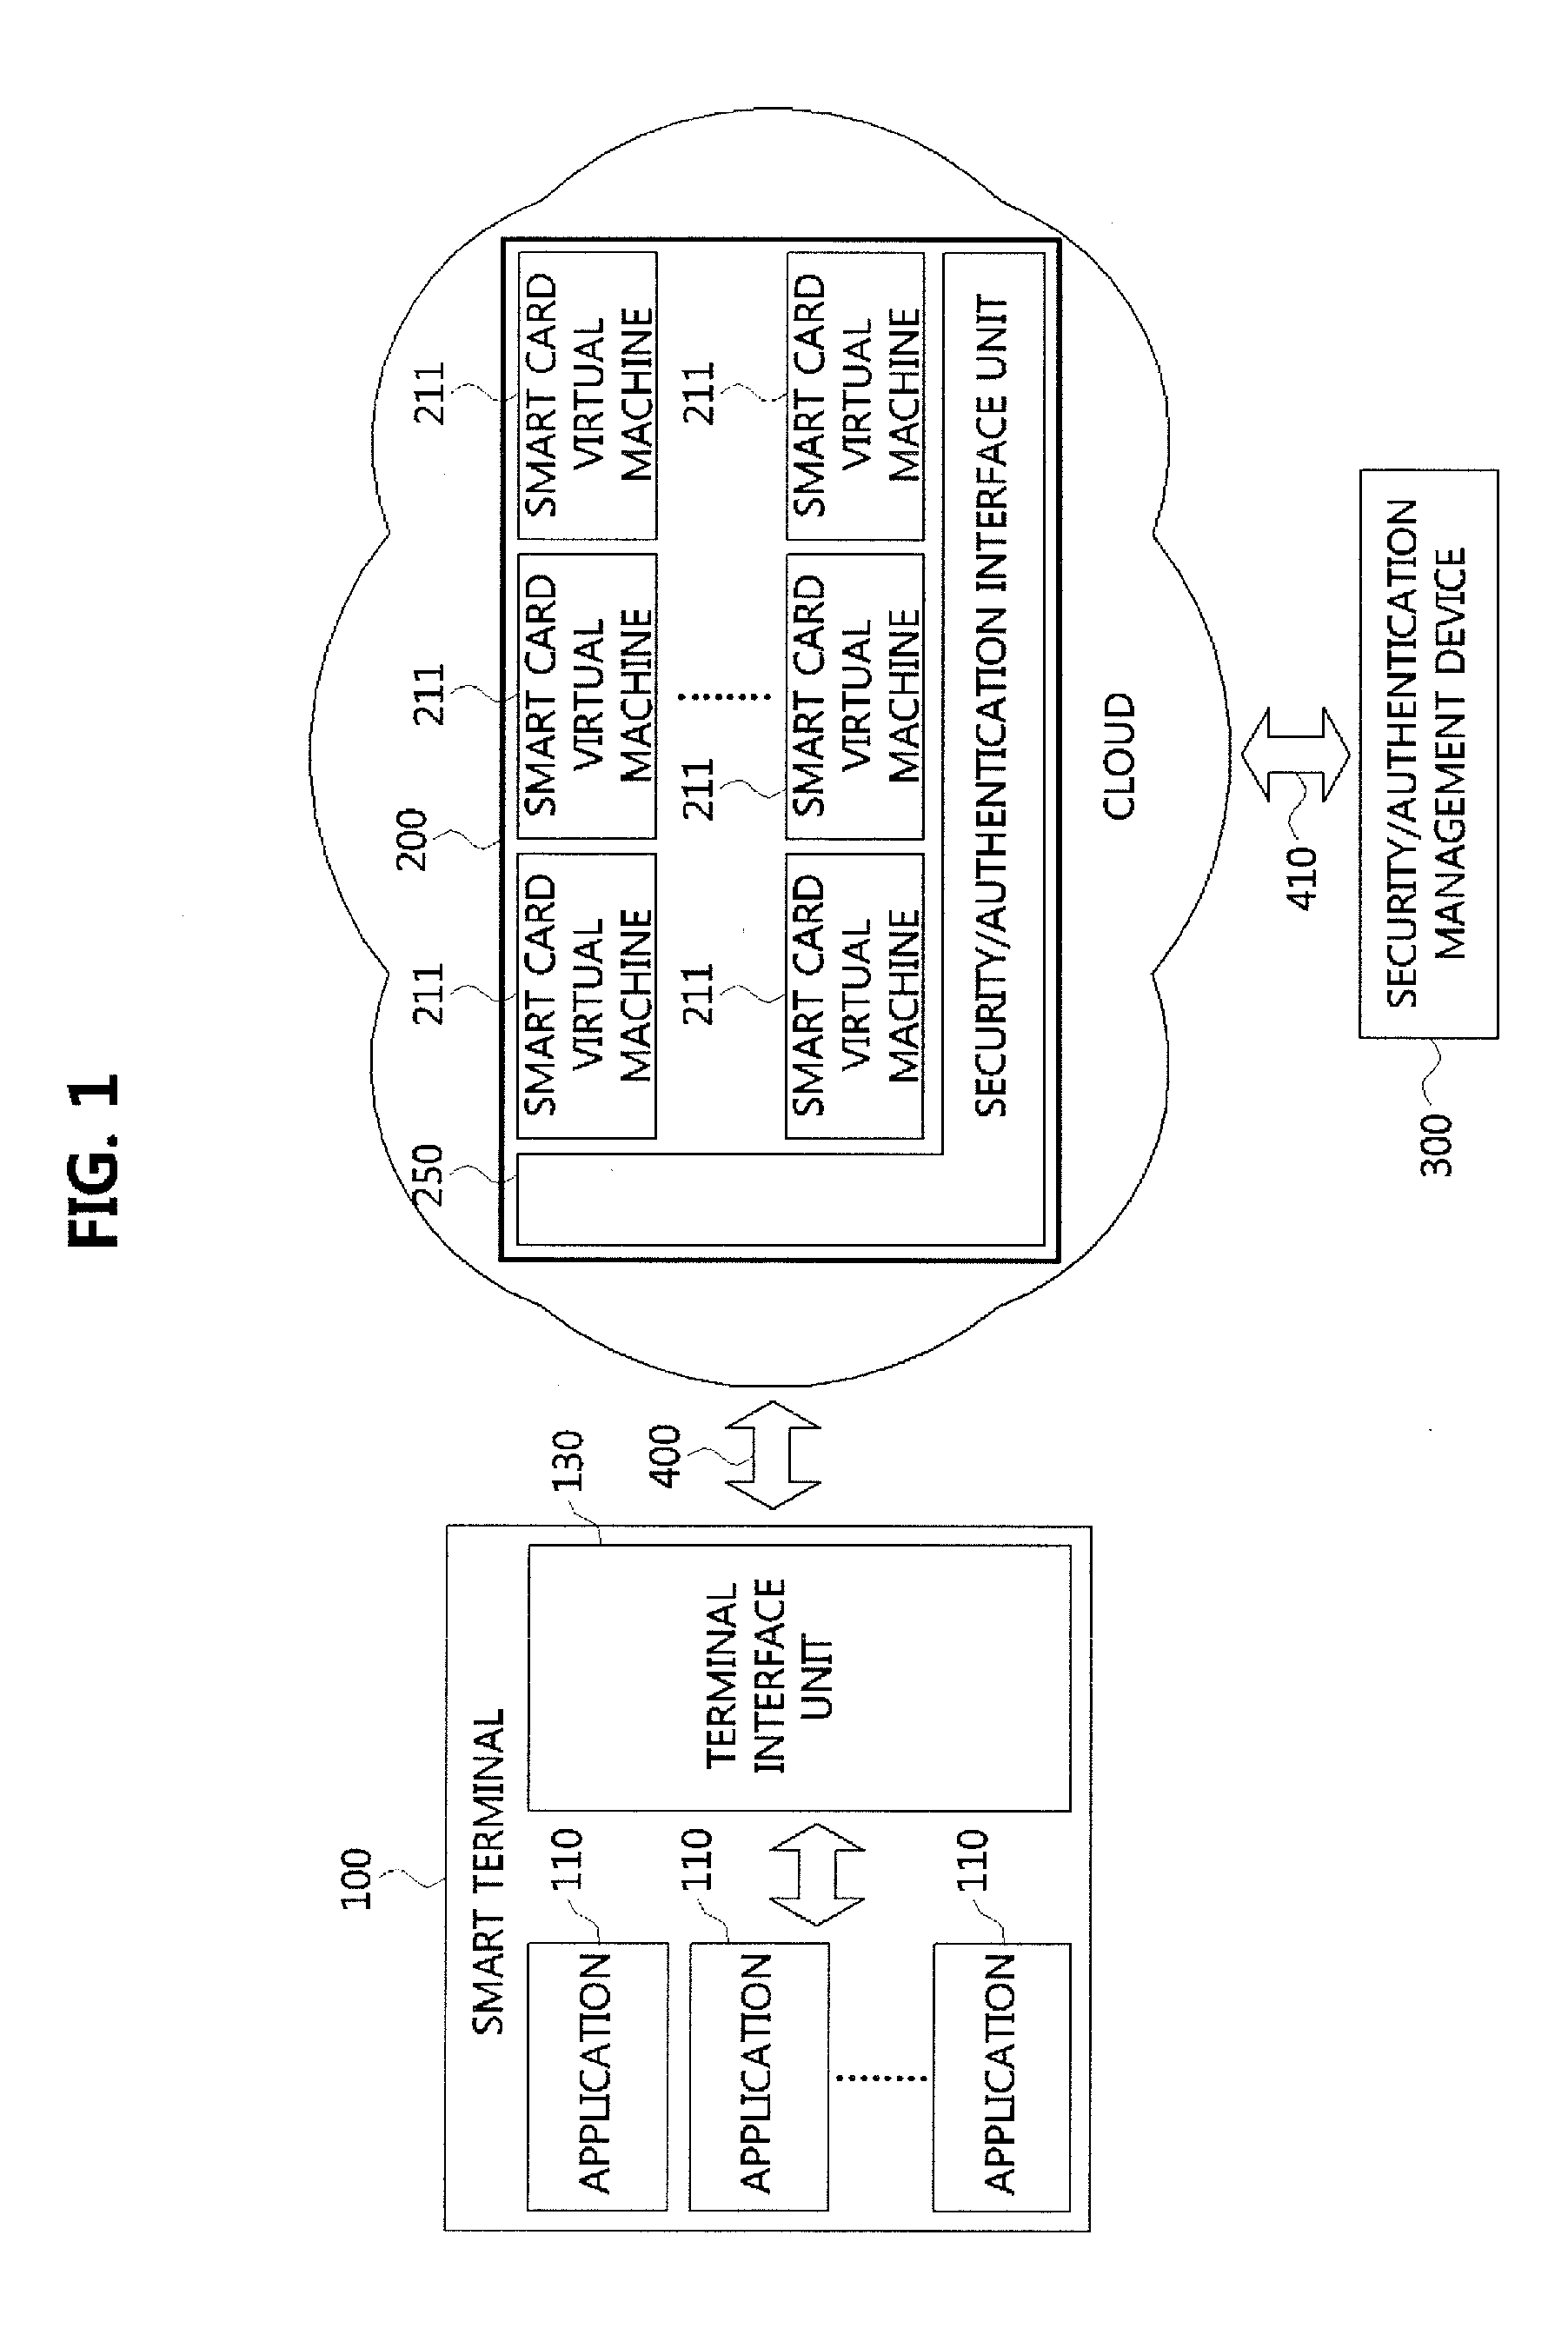 Smart card service method and apparatus for performing the same